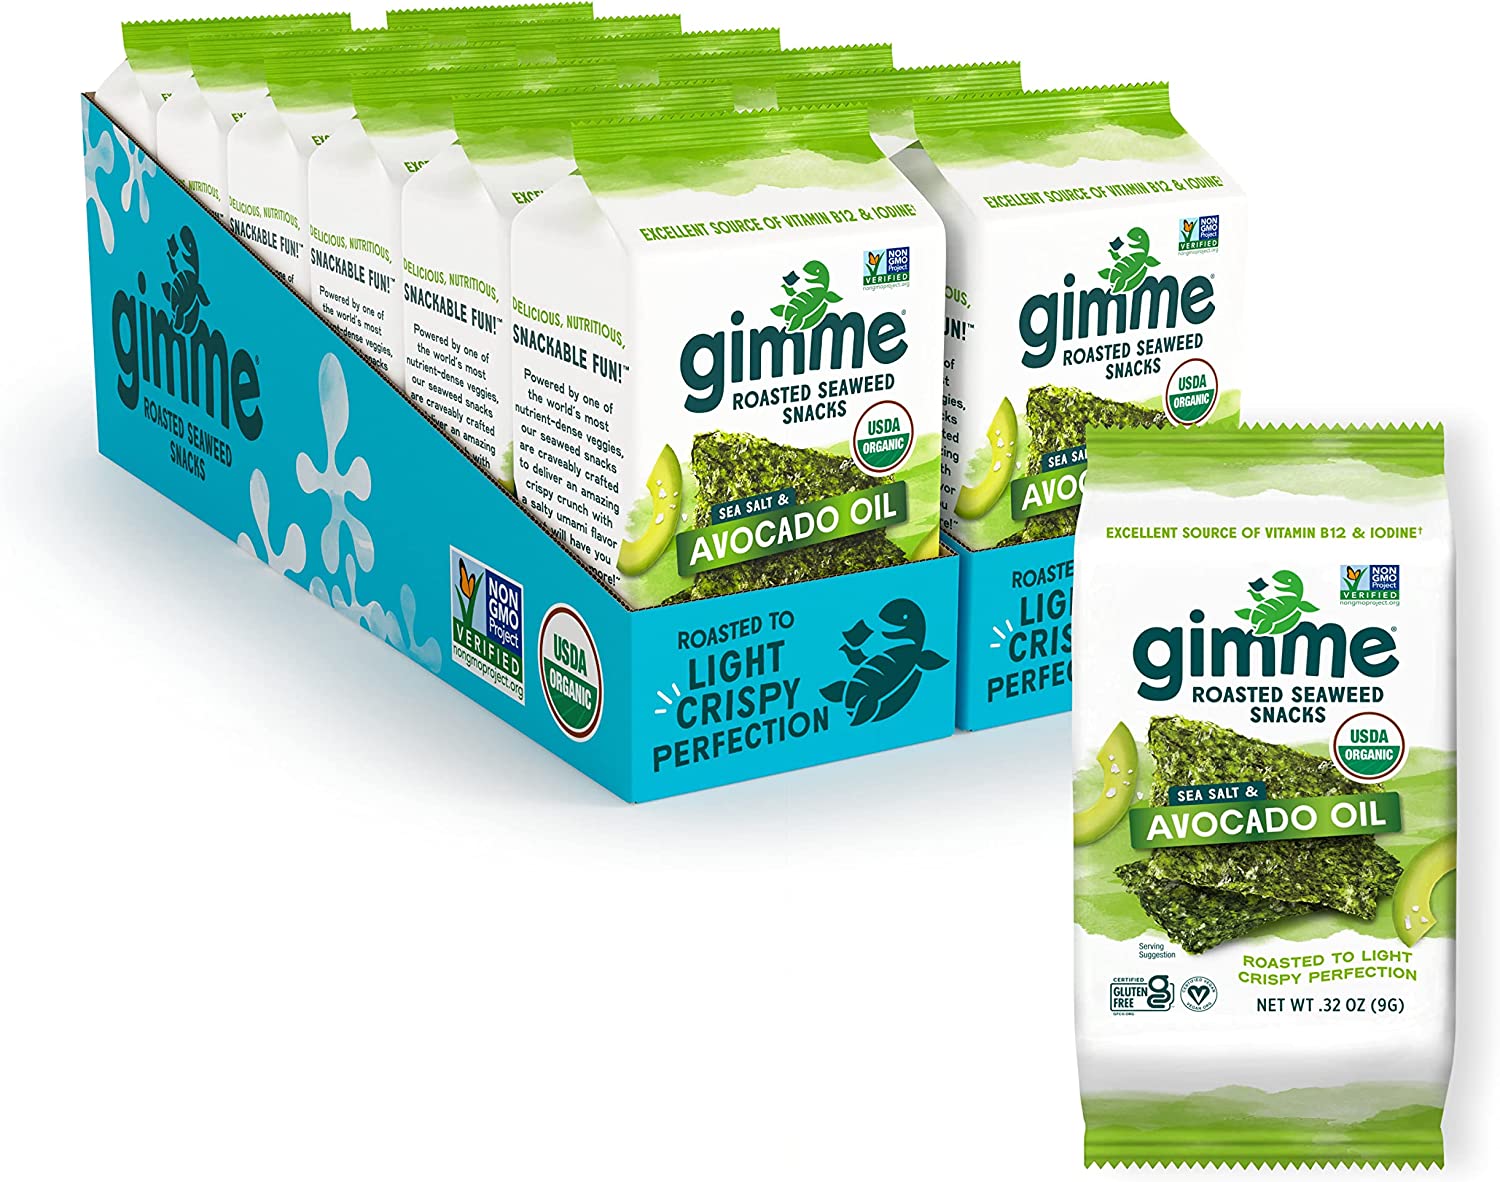 gimMe – Sea Salt & Avocado Oil – 12 Count Sharing Size – Organic Roasted Seaweed Sheets – Keto, Vegan, Gluten Free – Great Source of Iodine & Omega 3’s – Healthy On-The-Go Snack for Kids & Adults